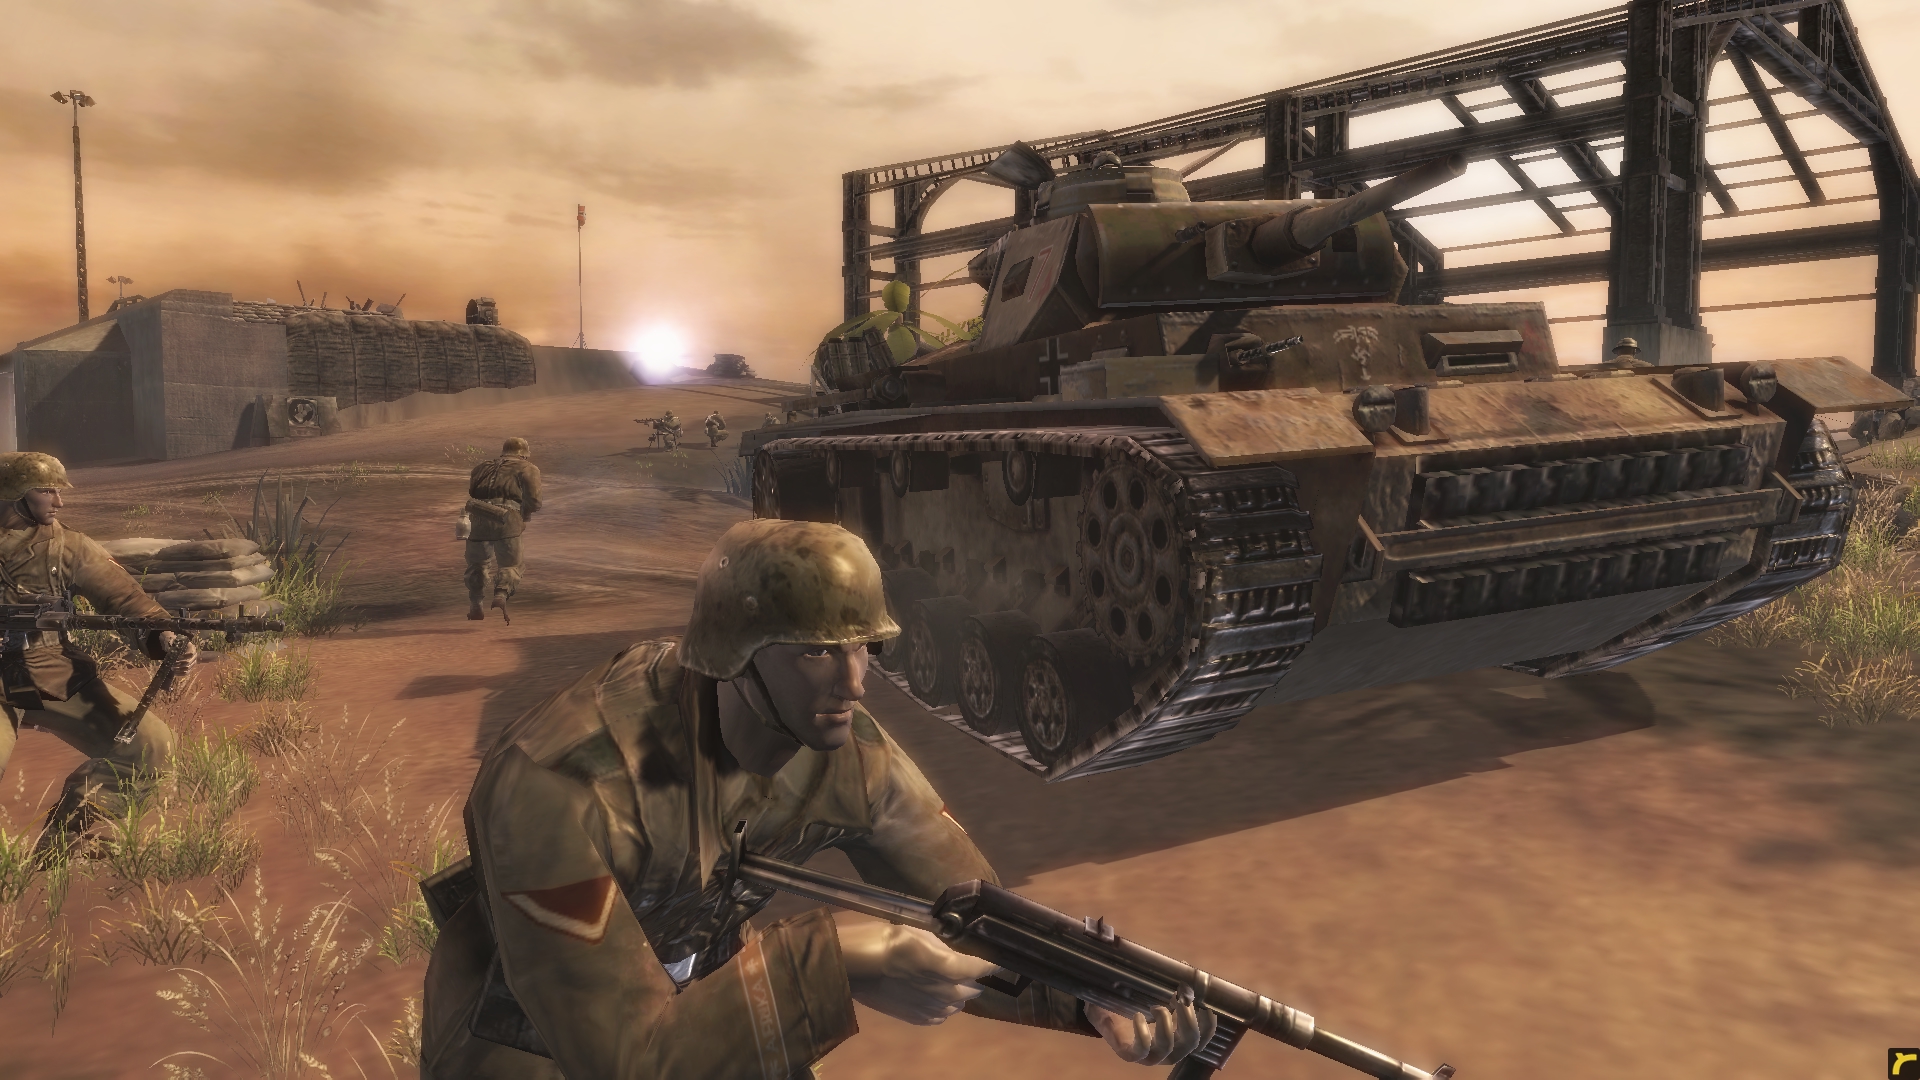 How To Install Company Of Heroes Mods